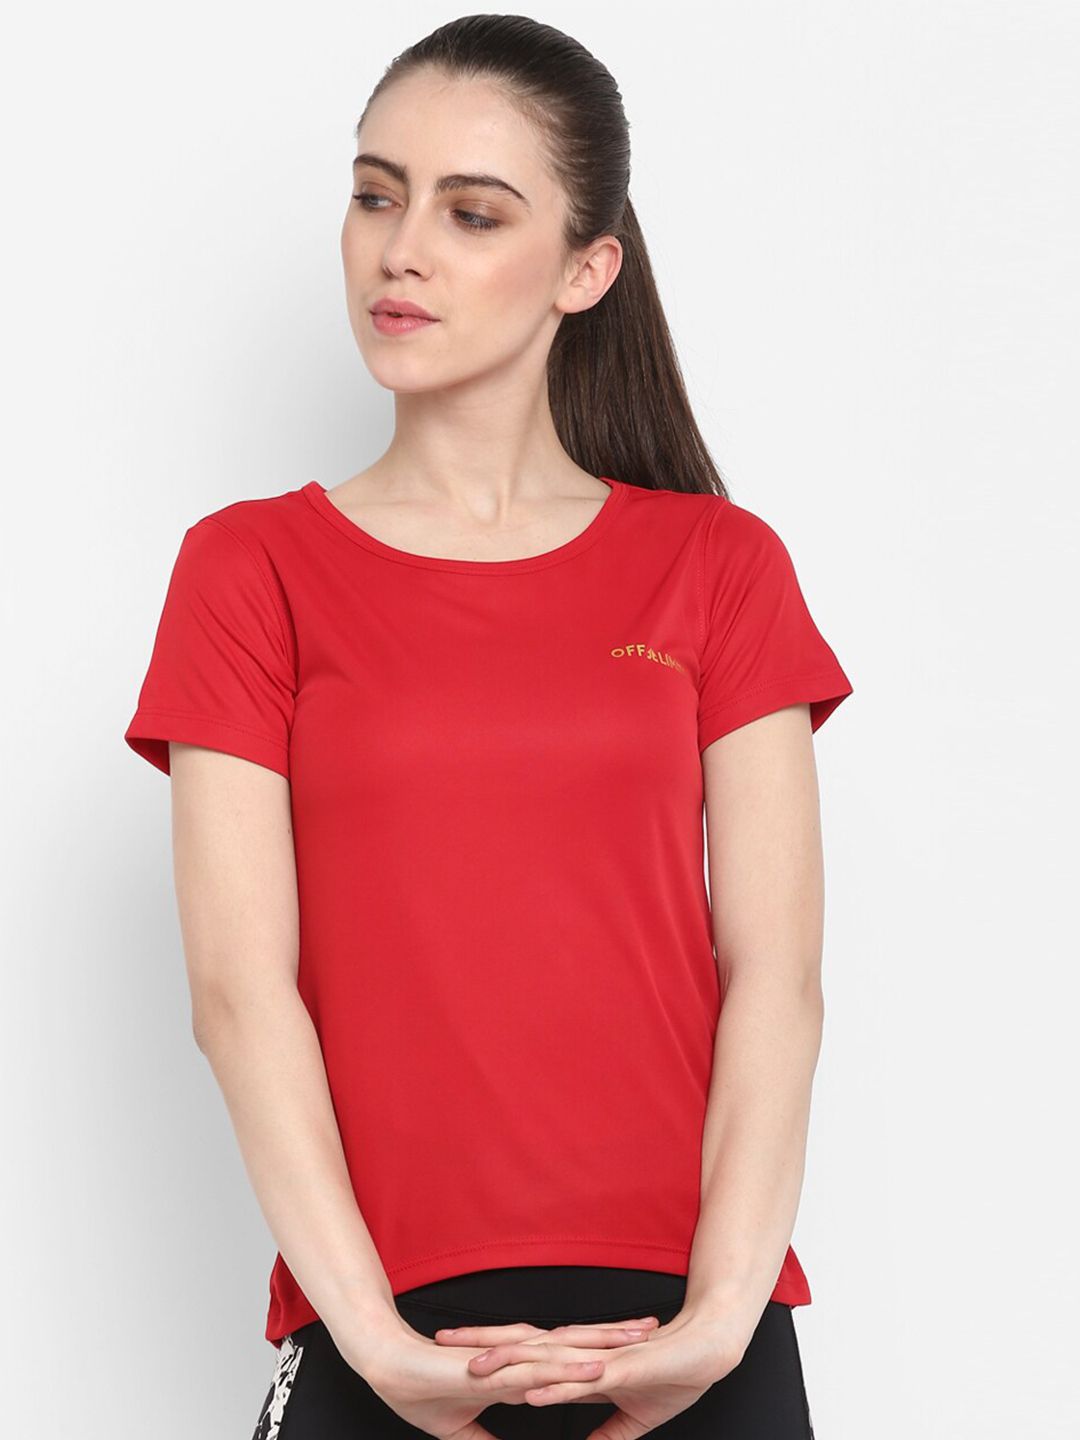 OFF LIMITS Women Red Slim Fit High Low Sports T-shirt Price in India